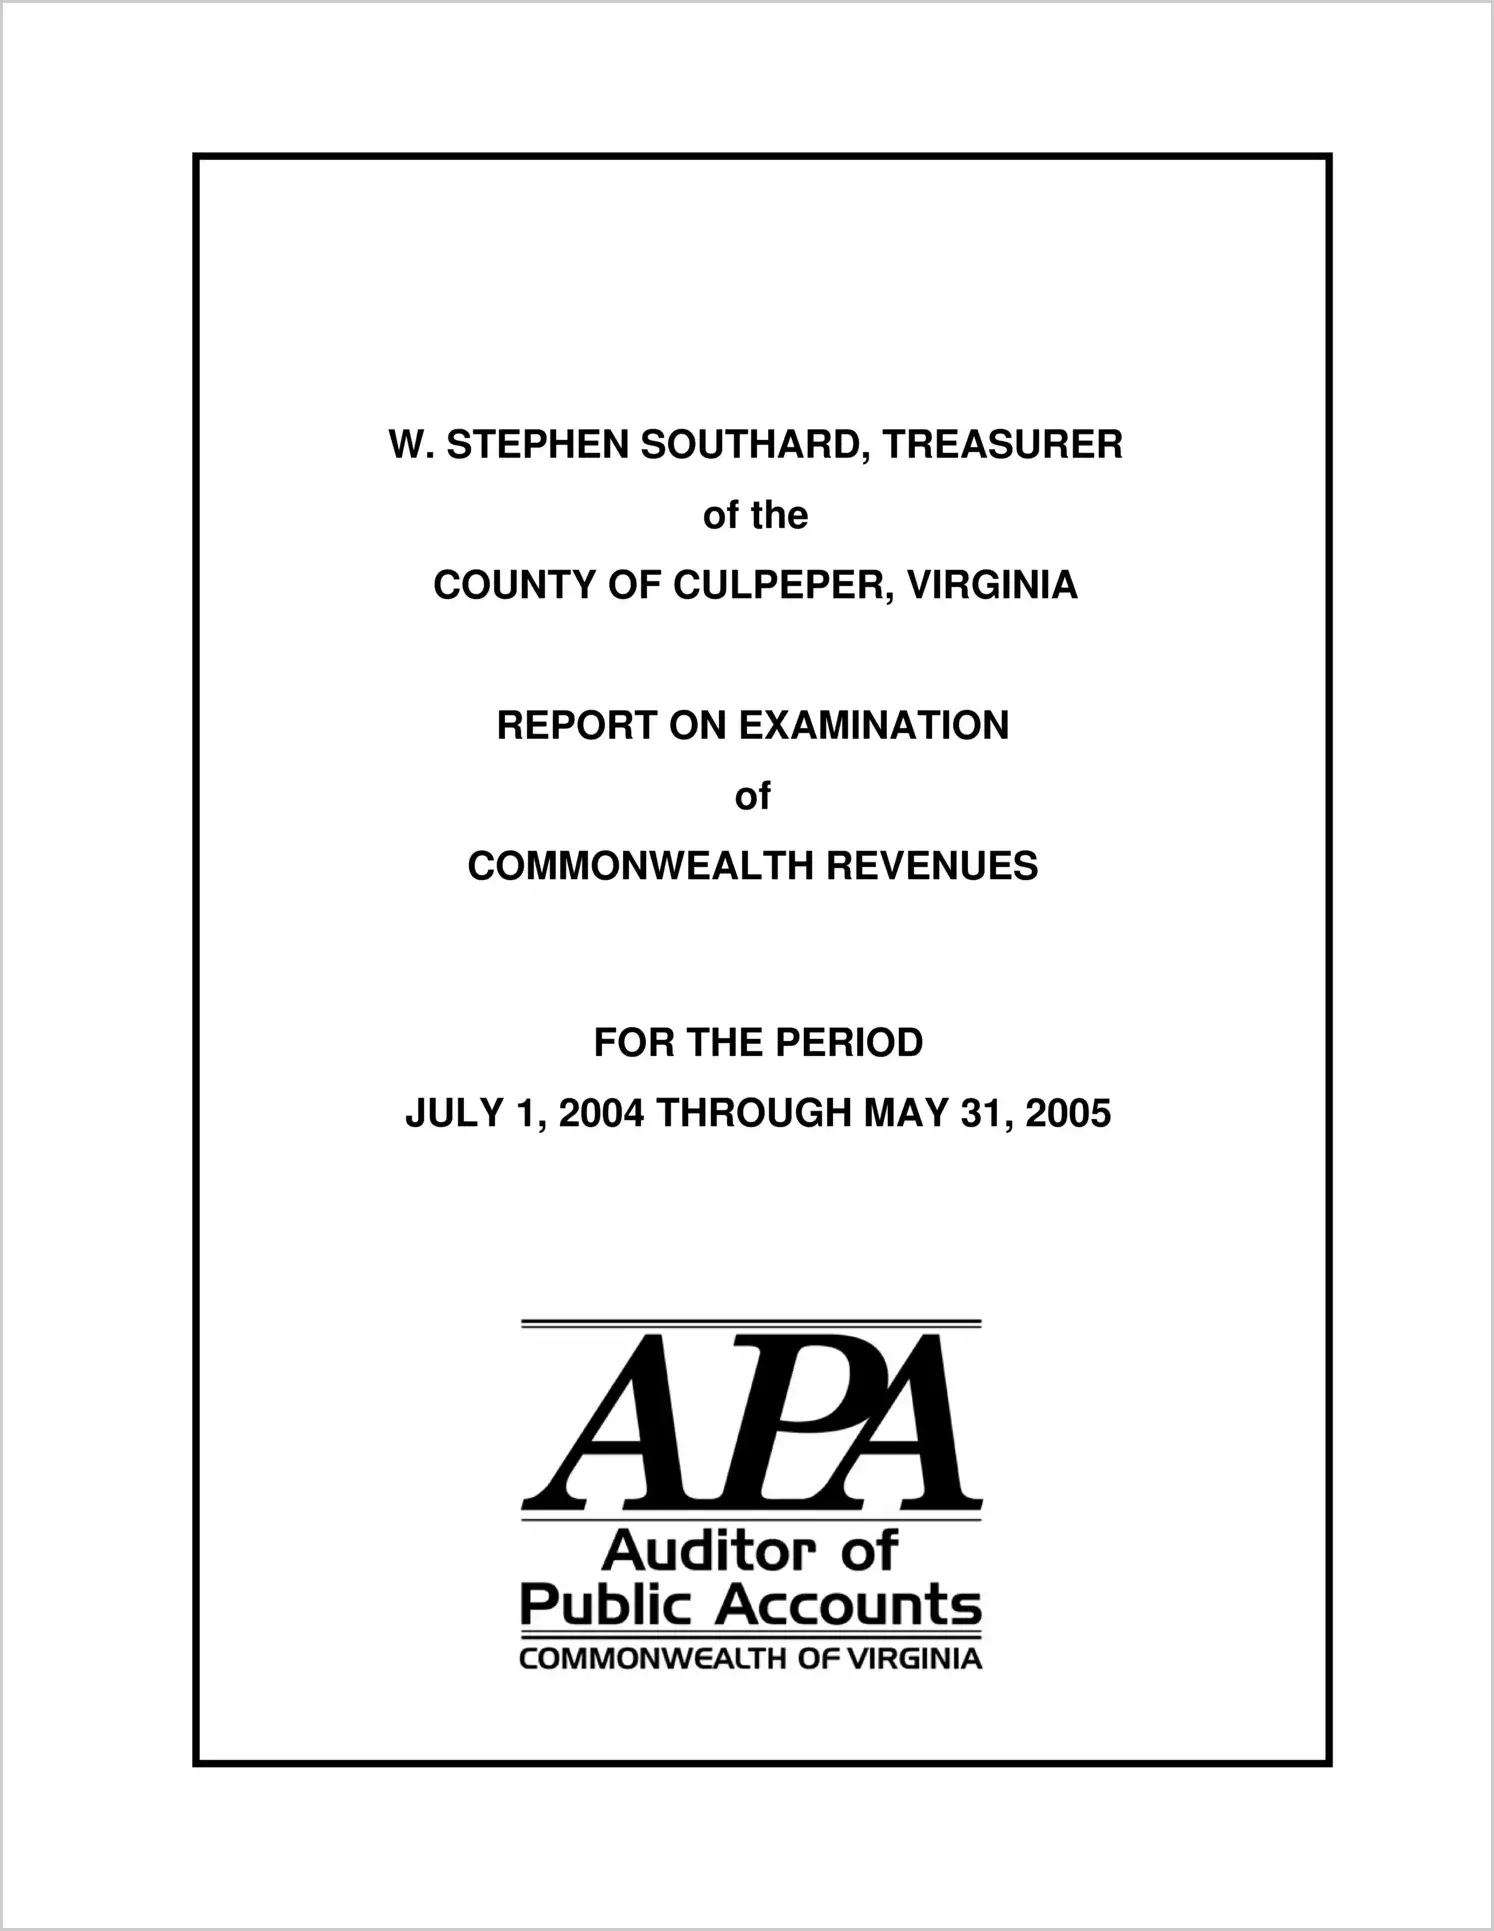 Treasurer? Accountability to the Commonwealth of W. Stephen Southard, Treasurer of the County of Culpeper, for the period July 1, 2004 through May 31, 2005